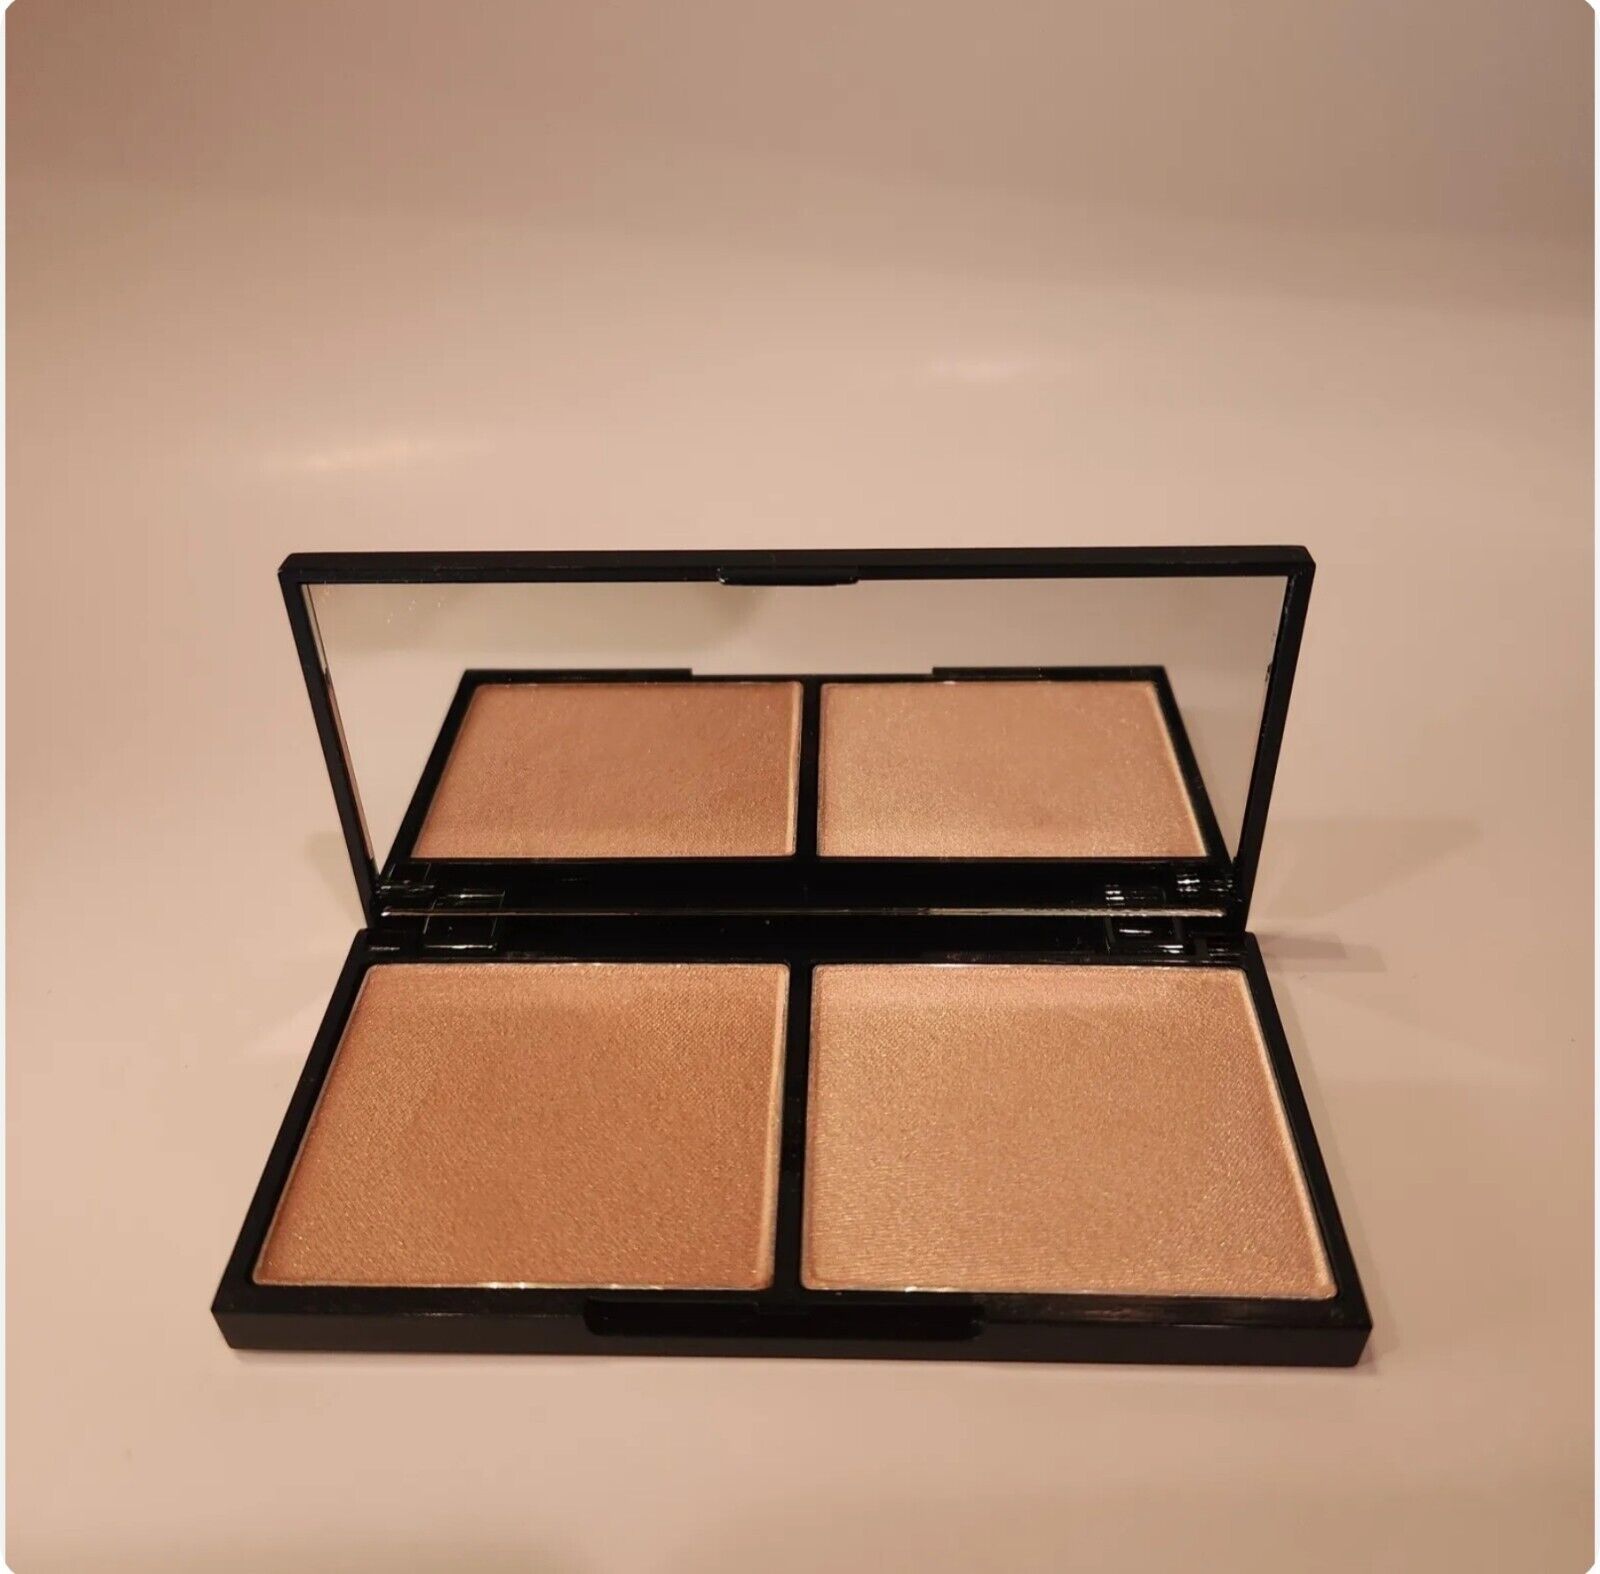 Primary image for Lune+ Aster Glow & Contour Bronzing Palette: Moonrise, .48oz